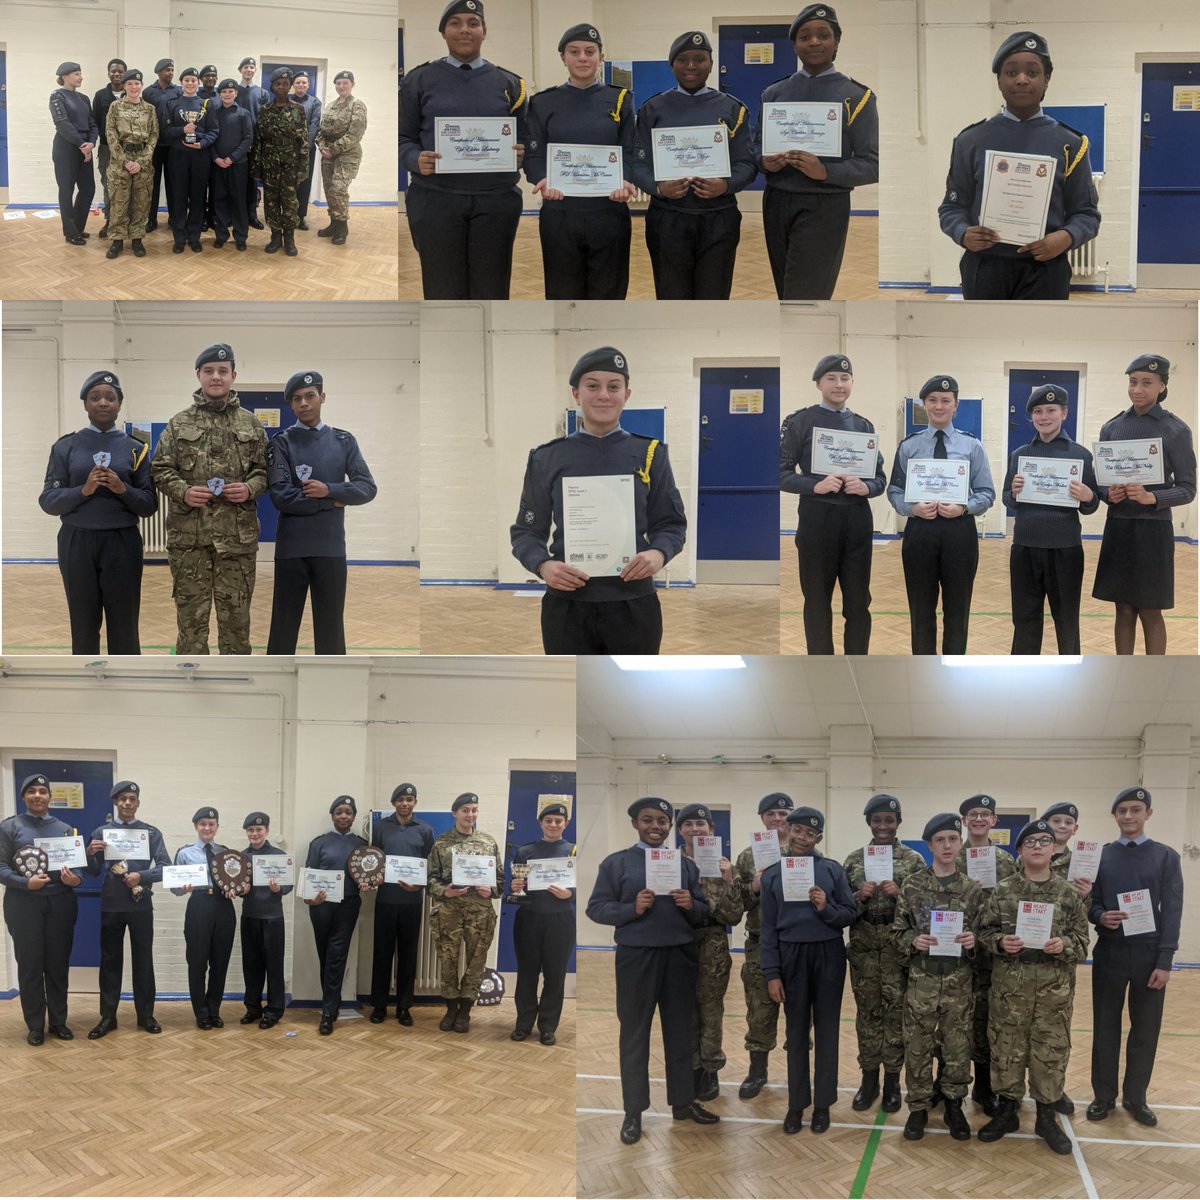 Last night we held our presentation evening, beginning with a demonstration of some of the activities that we partake in on the squadron. After, the OC awarded many trophies and certificates out to cadets that have gone above and beyond within the past year #Team504 #SEMWWhoWeAre